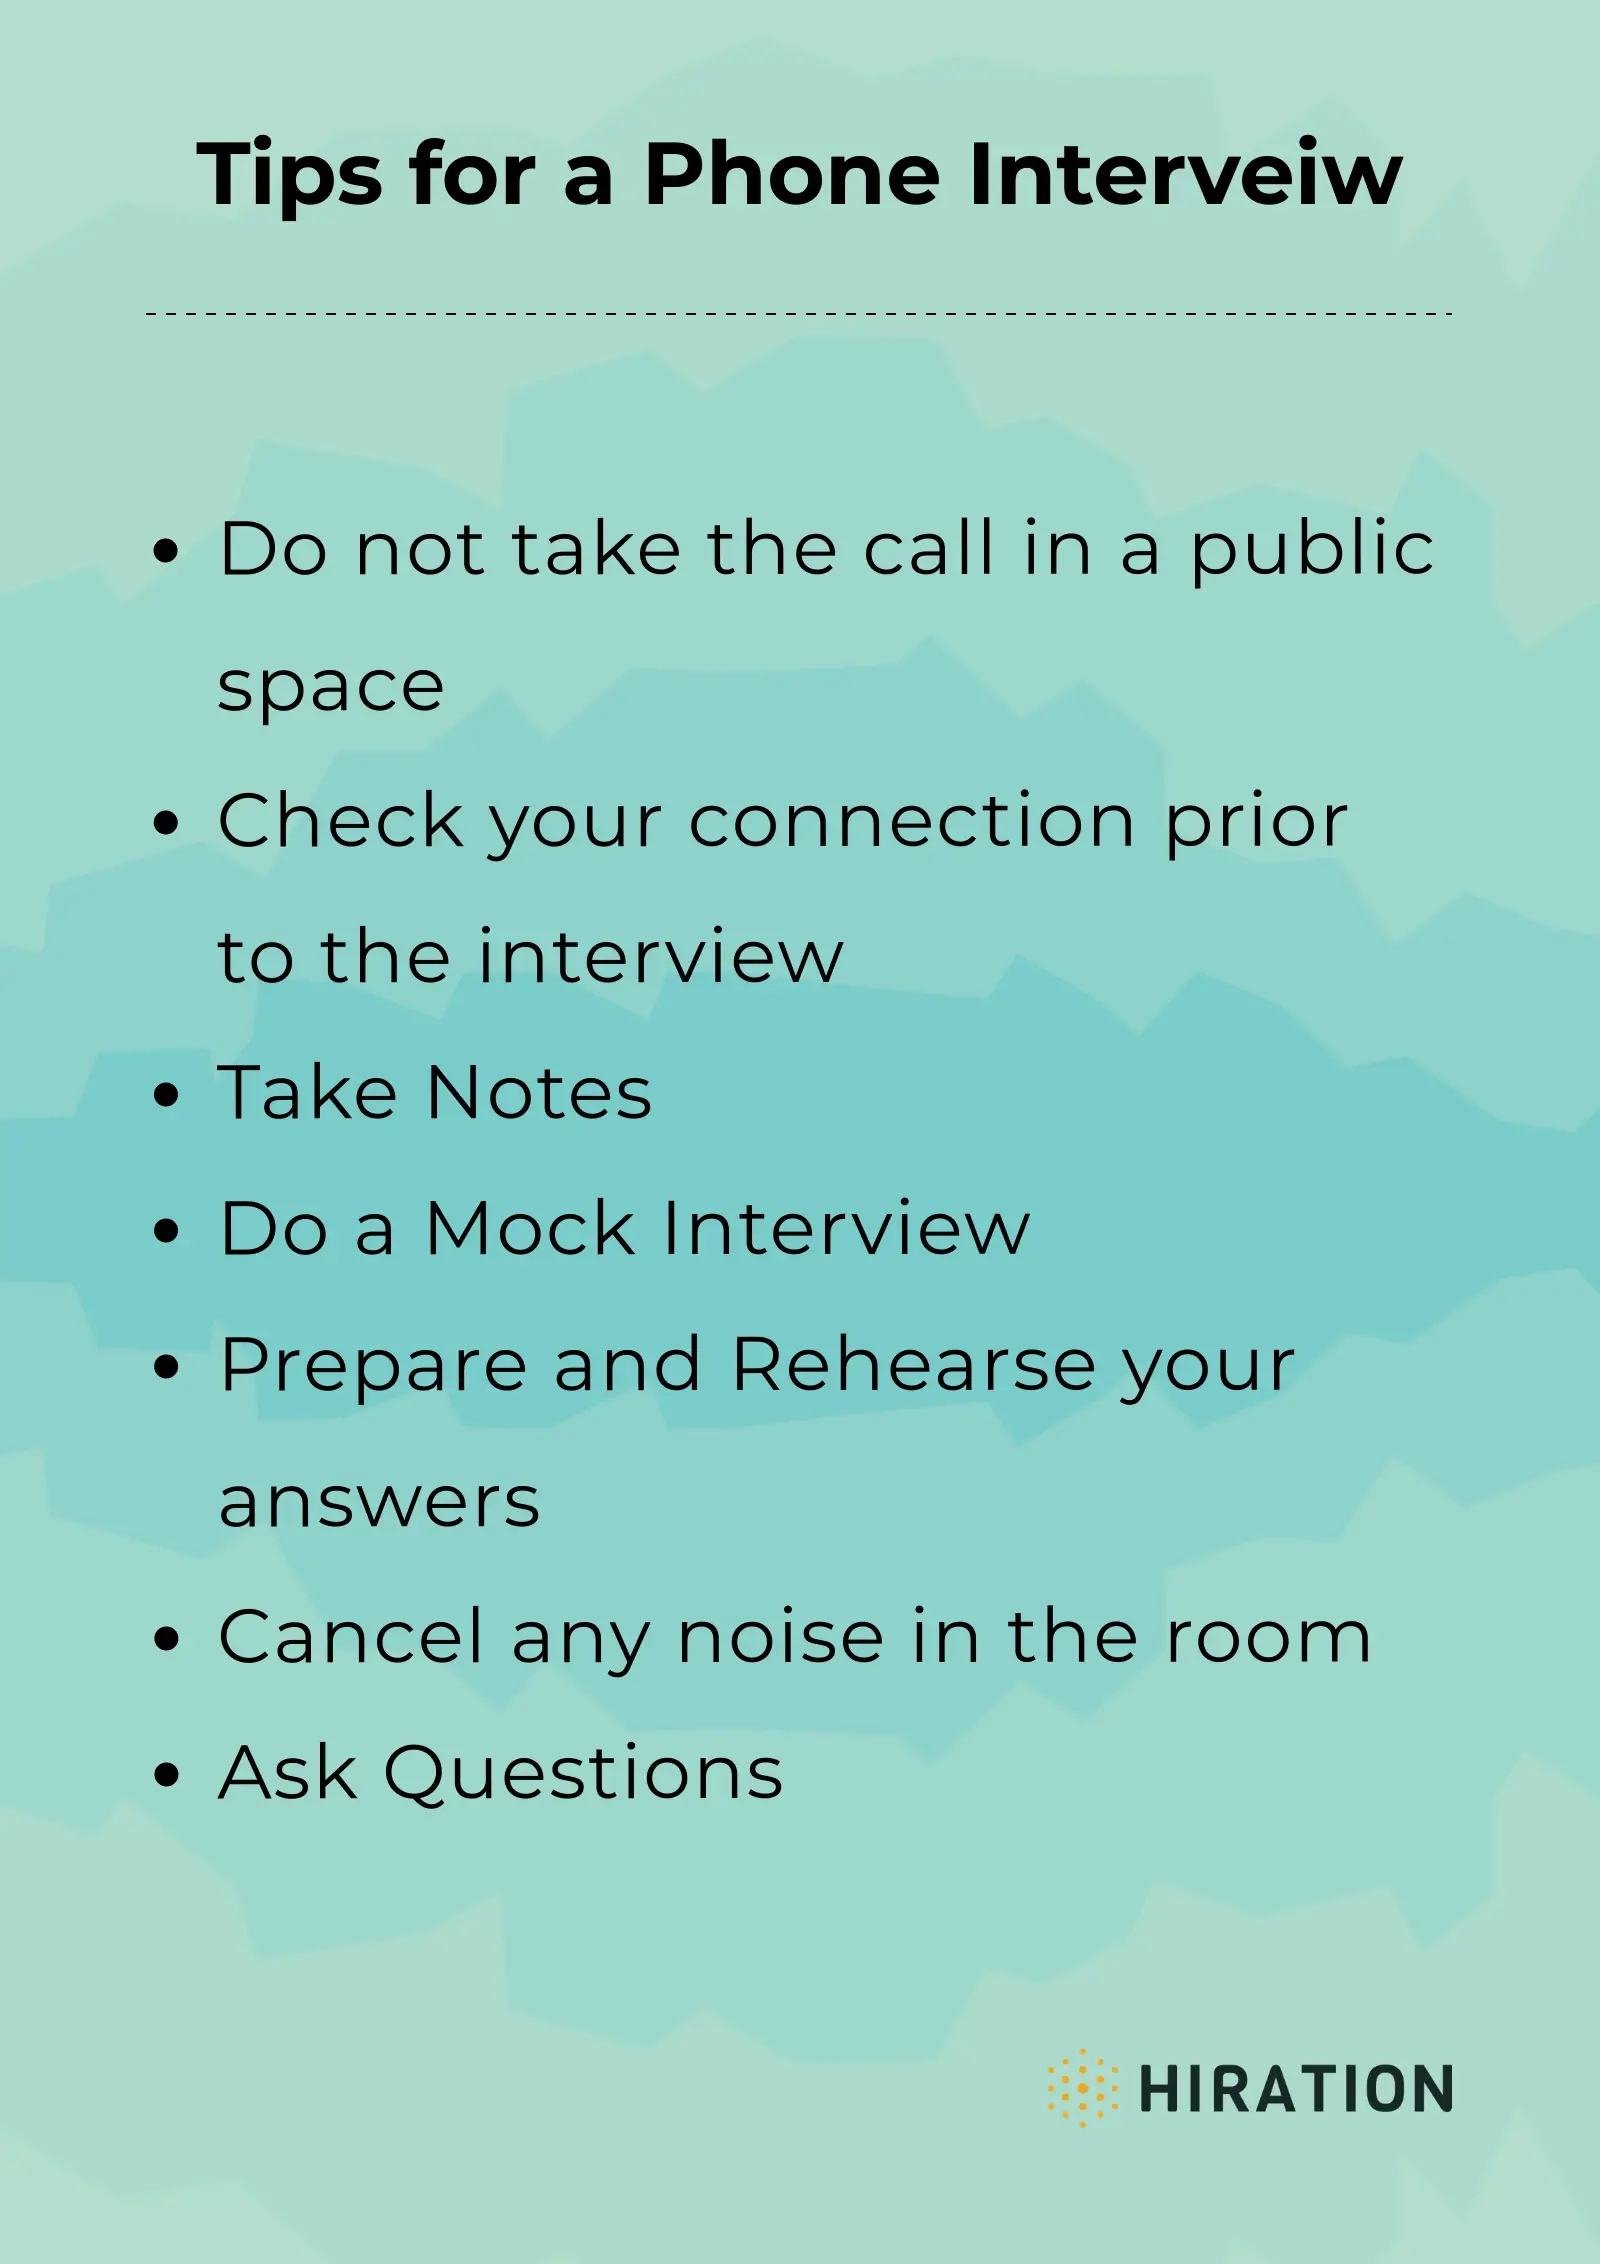 Phone Interview Questions: The 2020 Guide with Tips and 10+ Examples